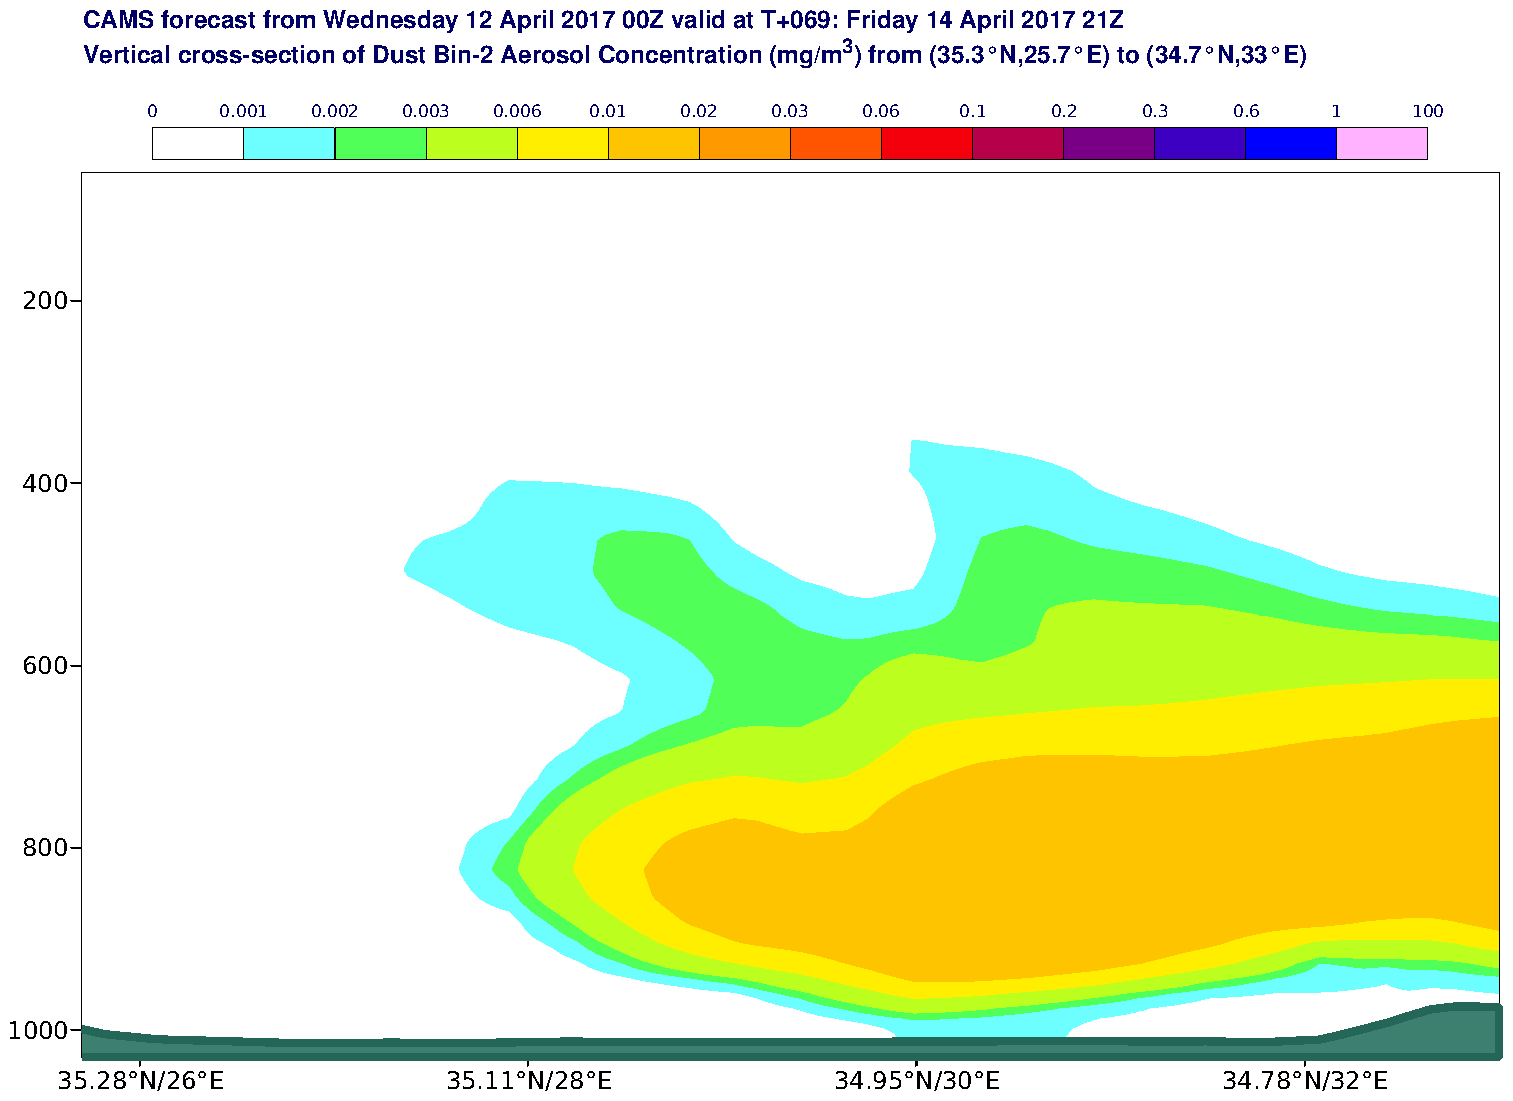 Vertical cross-section of Dust Bin-2 Aerosol Concentration (mg/m3) valid at T69 - 2017-04-14 21:00